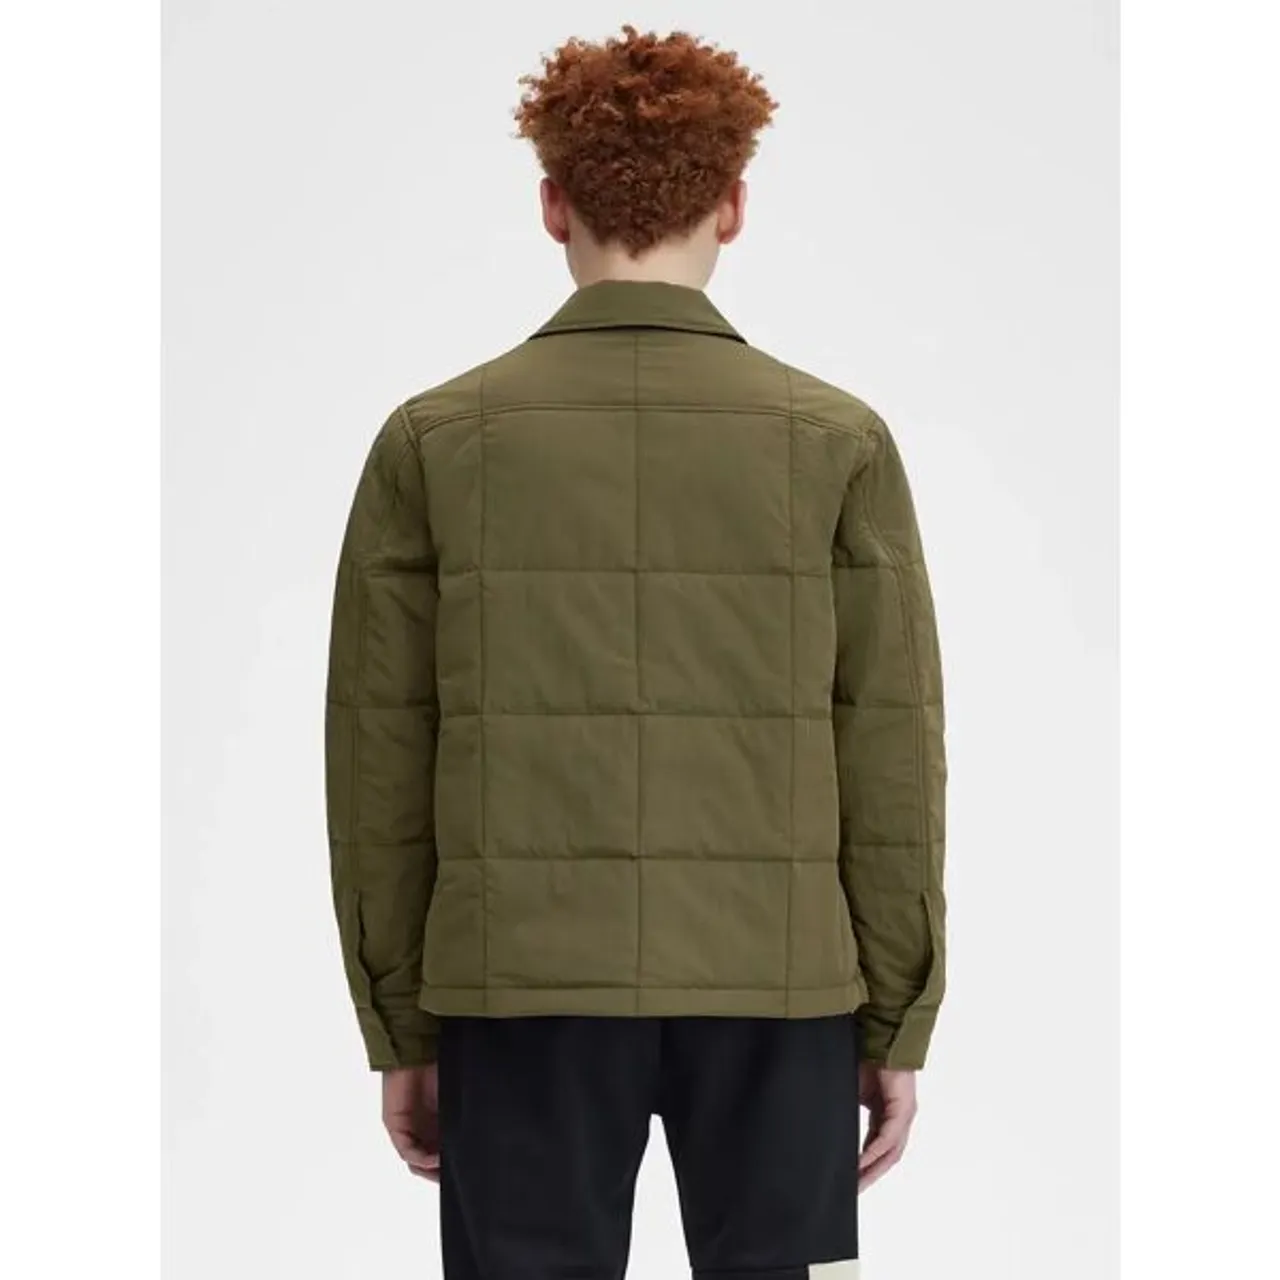 Fred Perry Quilted Overshirt, Uniform Green - Uniform Green - Male